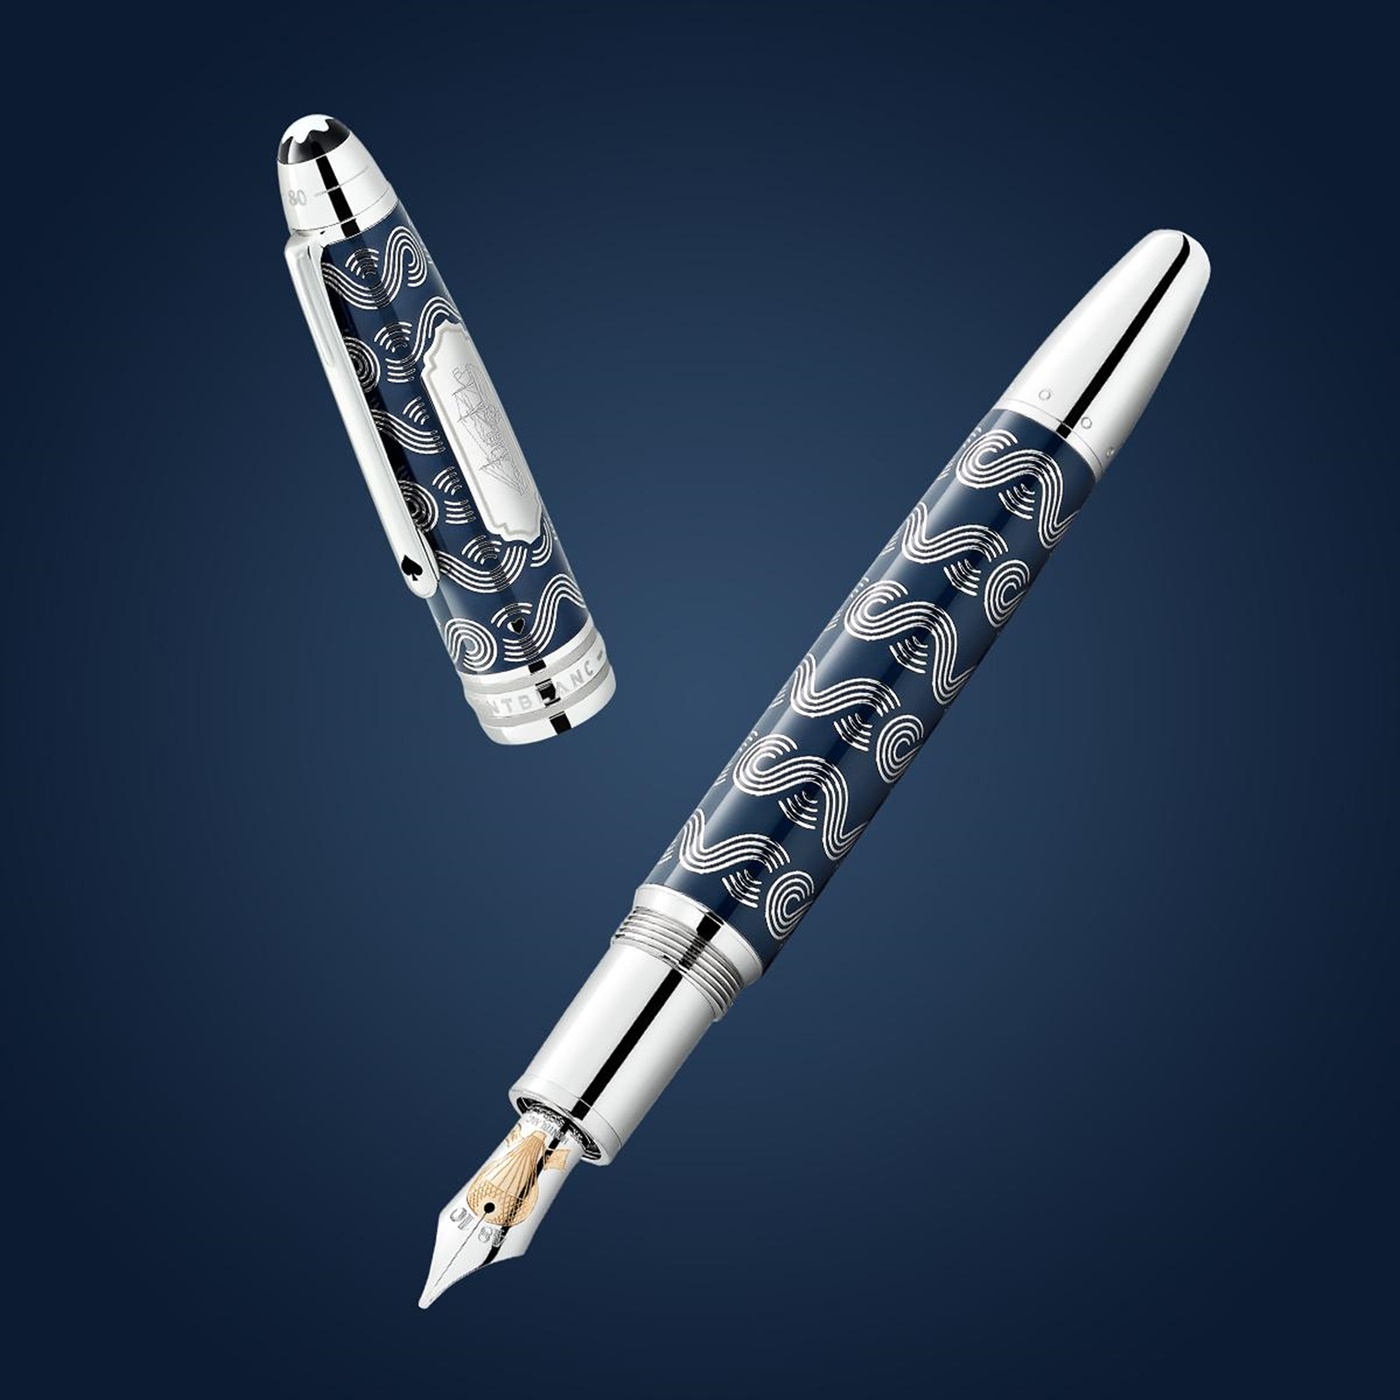 5.Montblanc Meisterstuck Around the World in 80 Days Resin Le Grand fountain pen